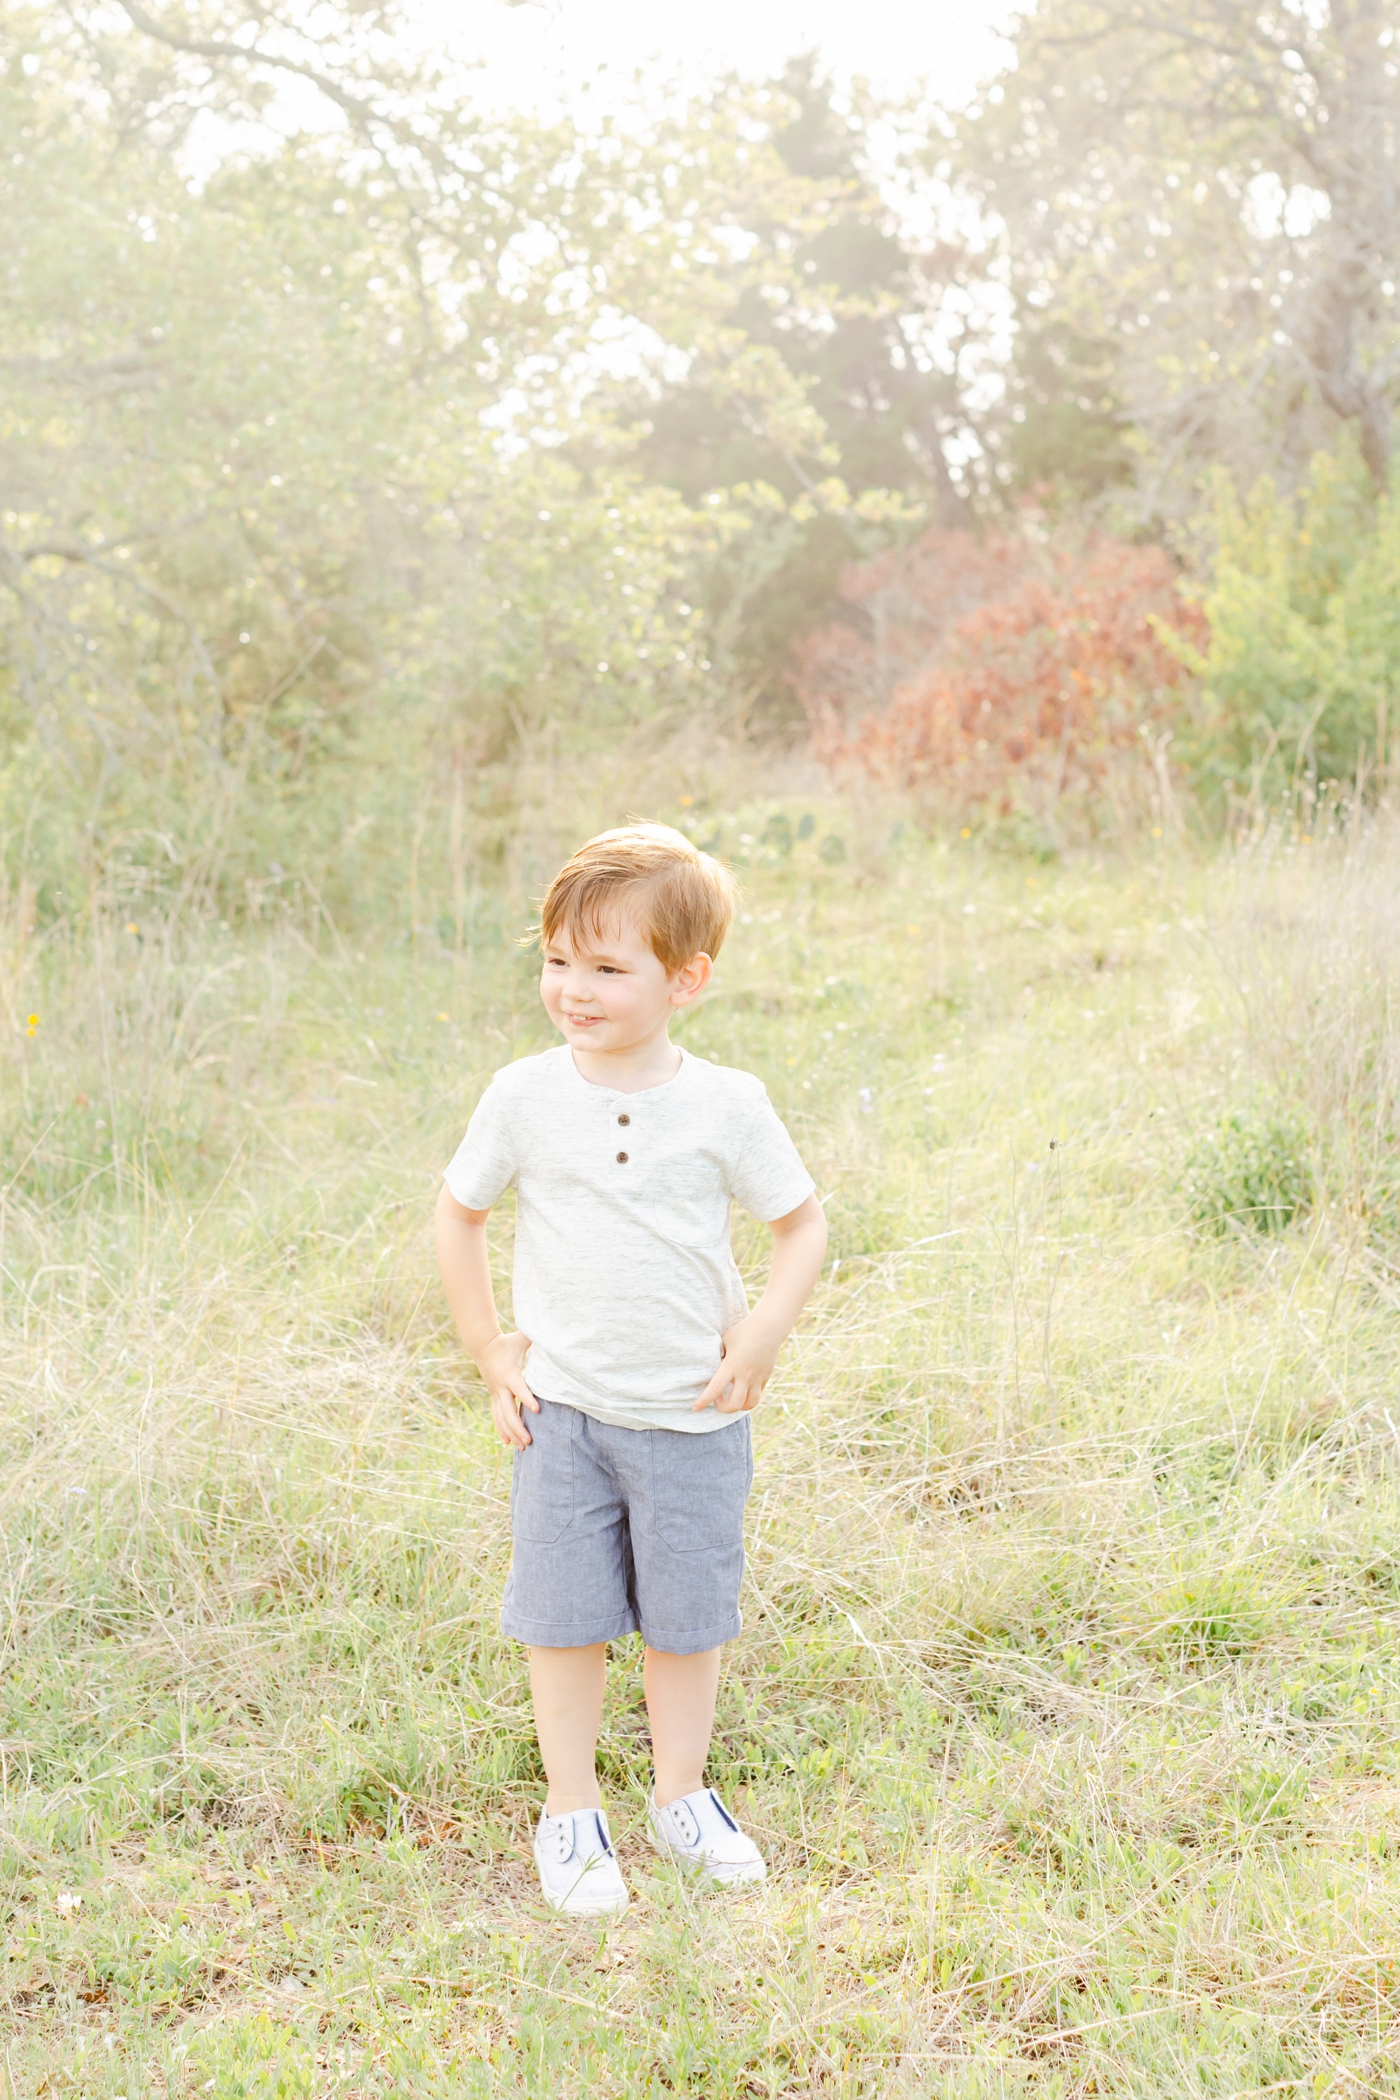 Little boy pulling his shirt down in a field family session. Photo by Sana Ahmed Photography.